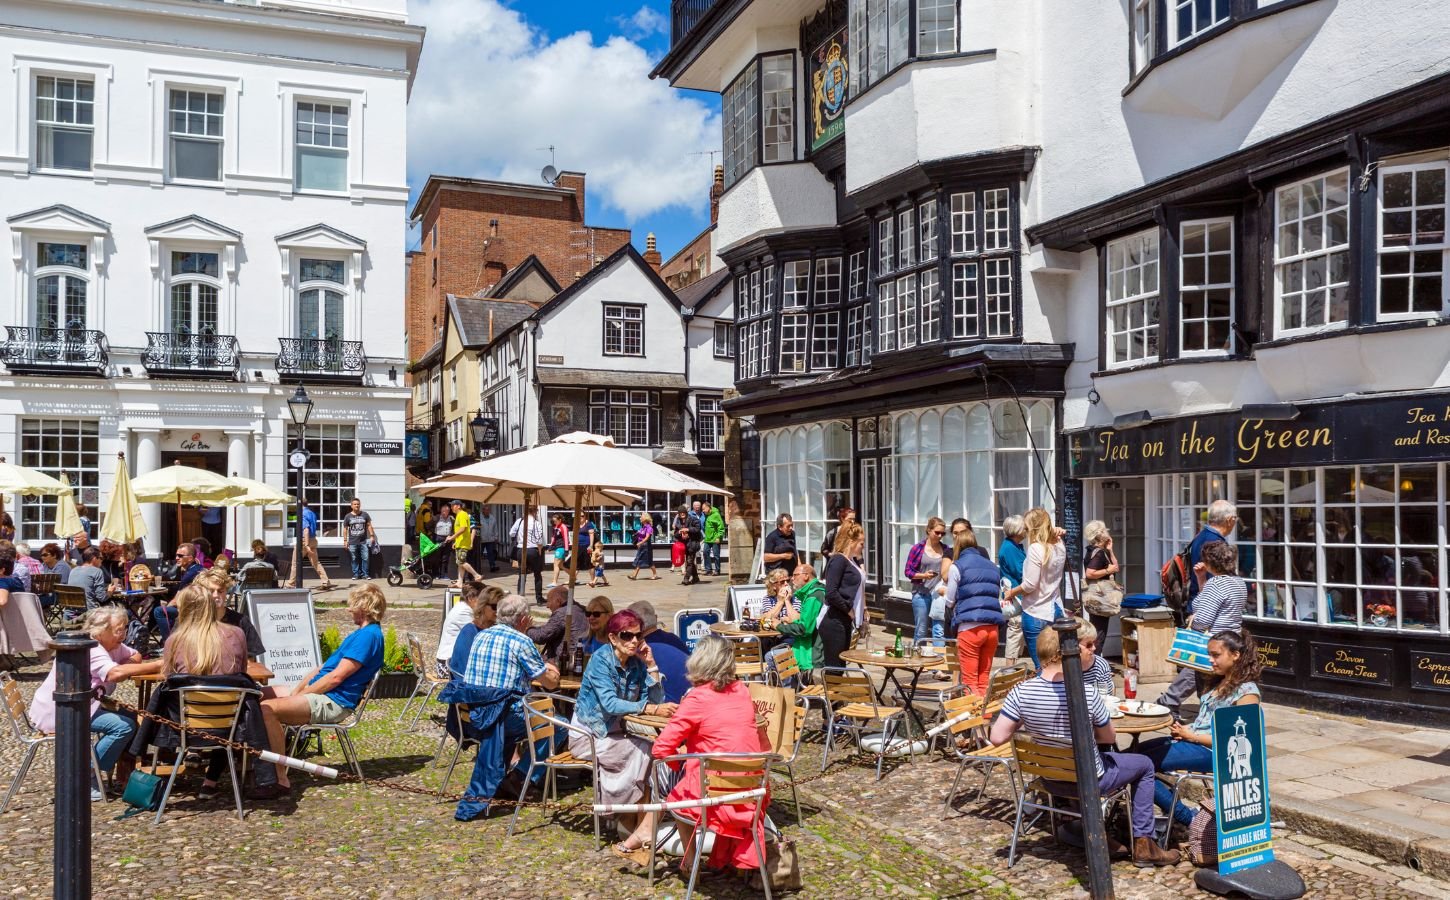 People eating outside in UK city Exeter